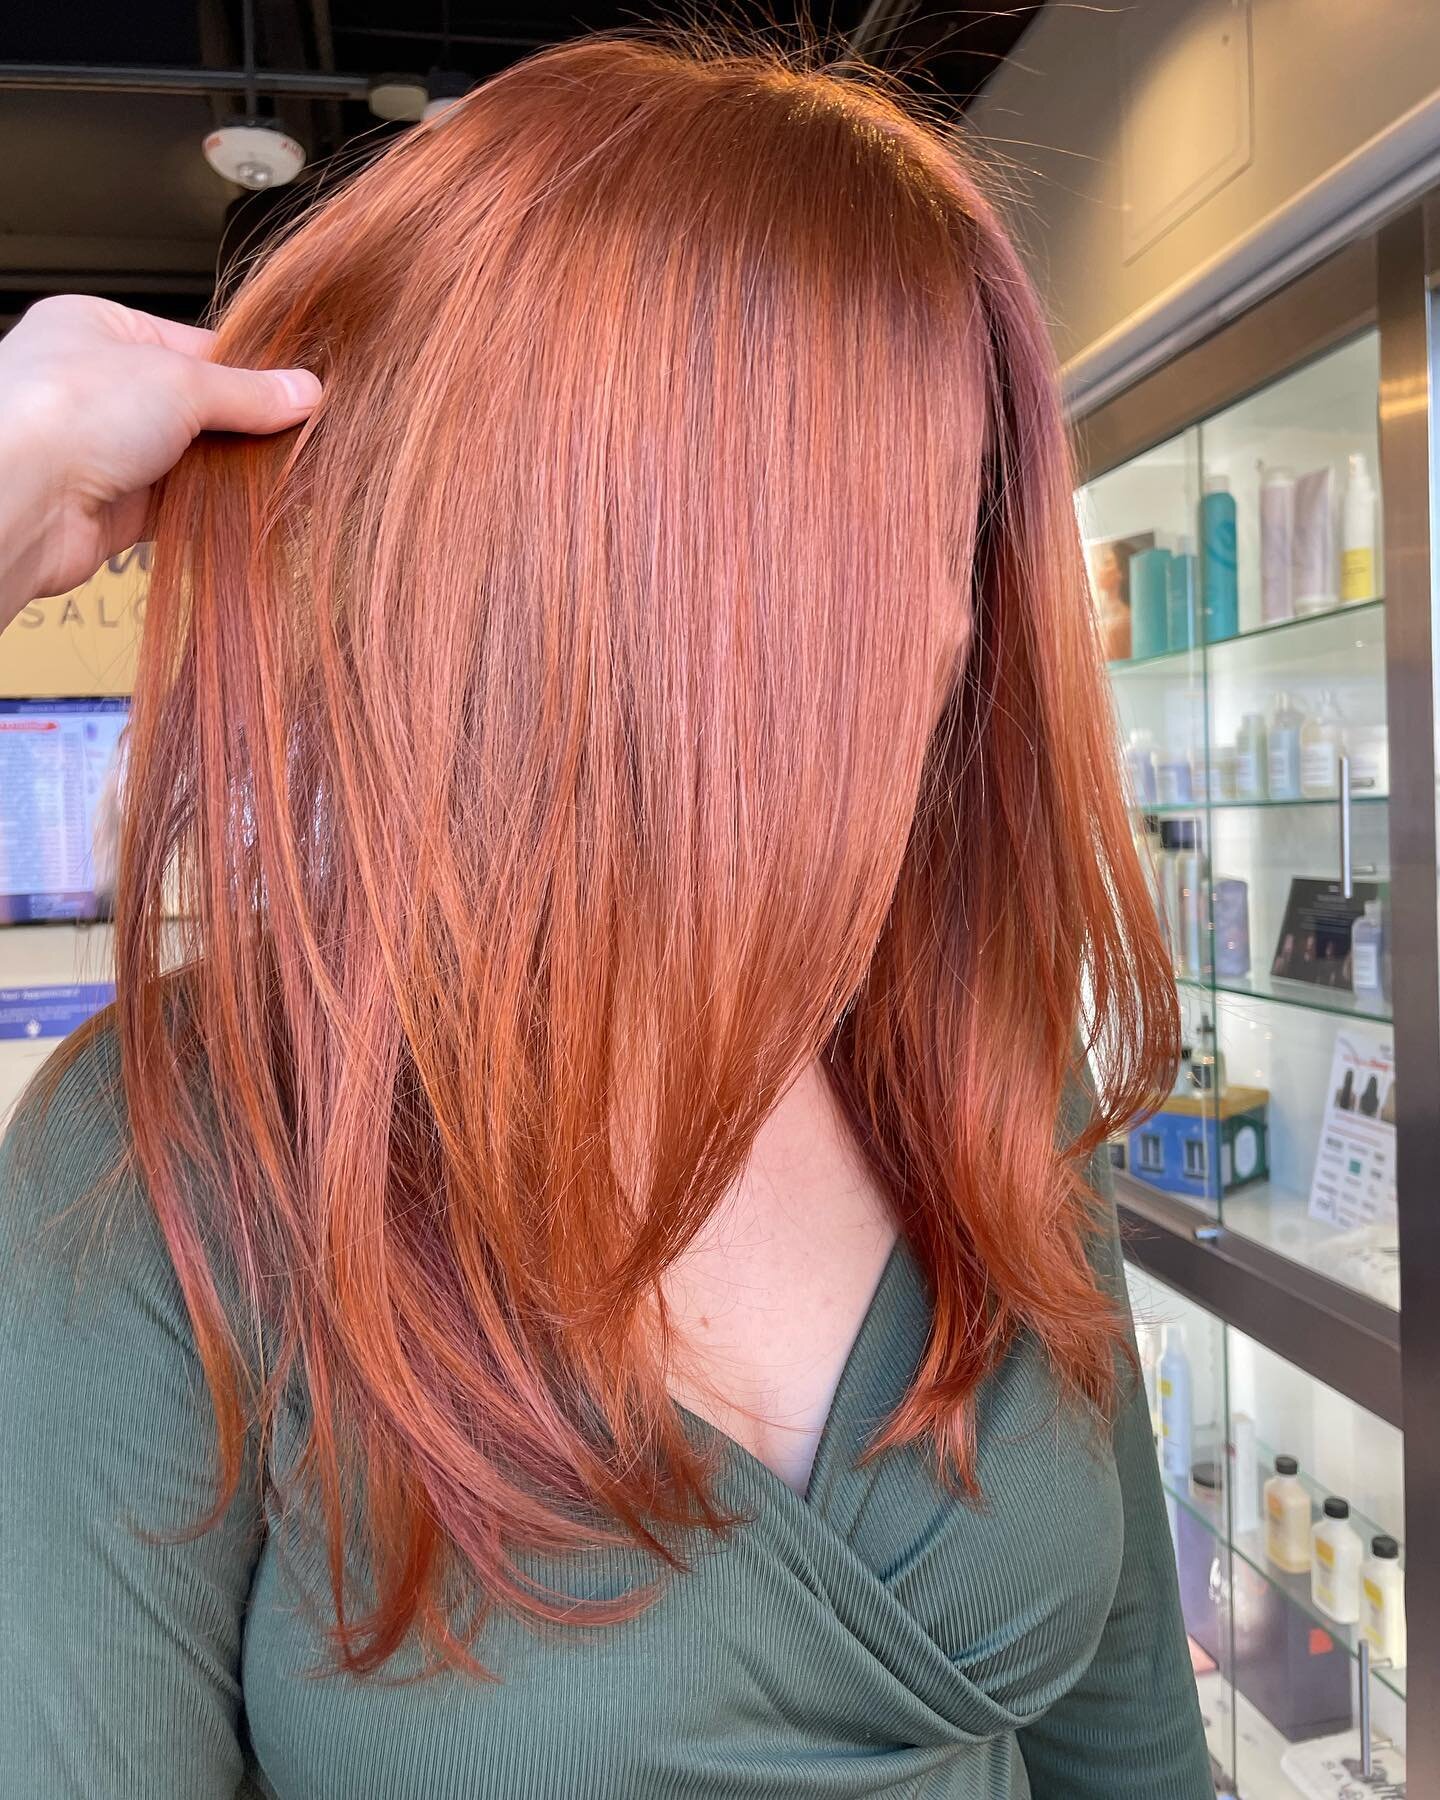 This color is a dream 🧡 🍓 refreshed the color using 7cc by Joico and of course used dream blowout by Joico for the perfect blowout 😍

#redhair #strawberryblonde #bouldercolorado #denvercolorado #boulderhairstylist #denverhairstylist #joicocolor